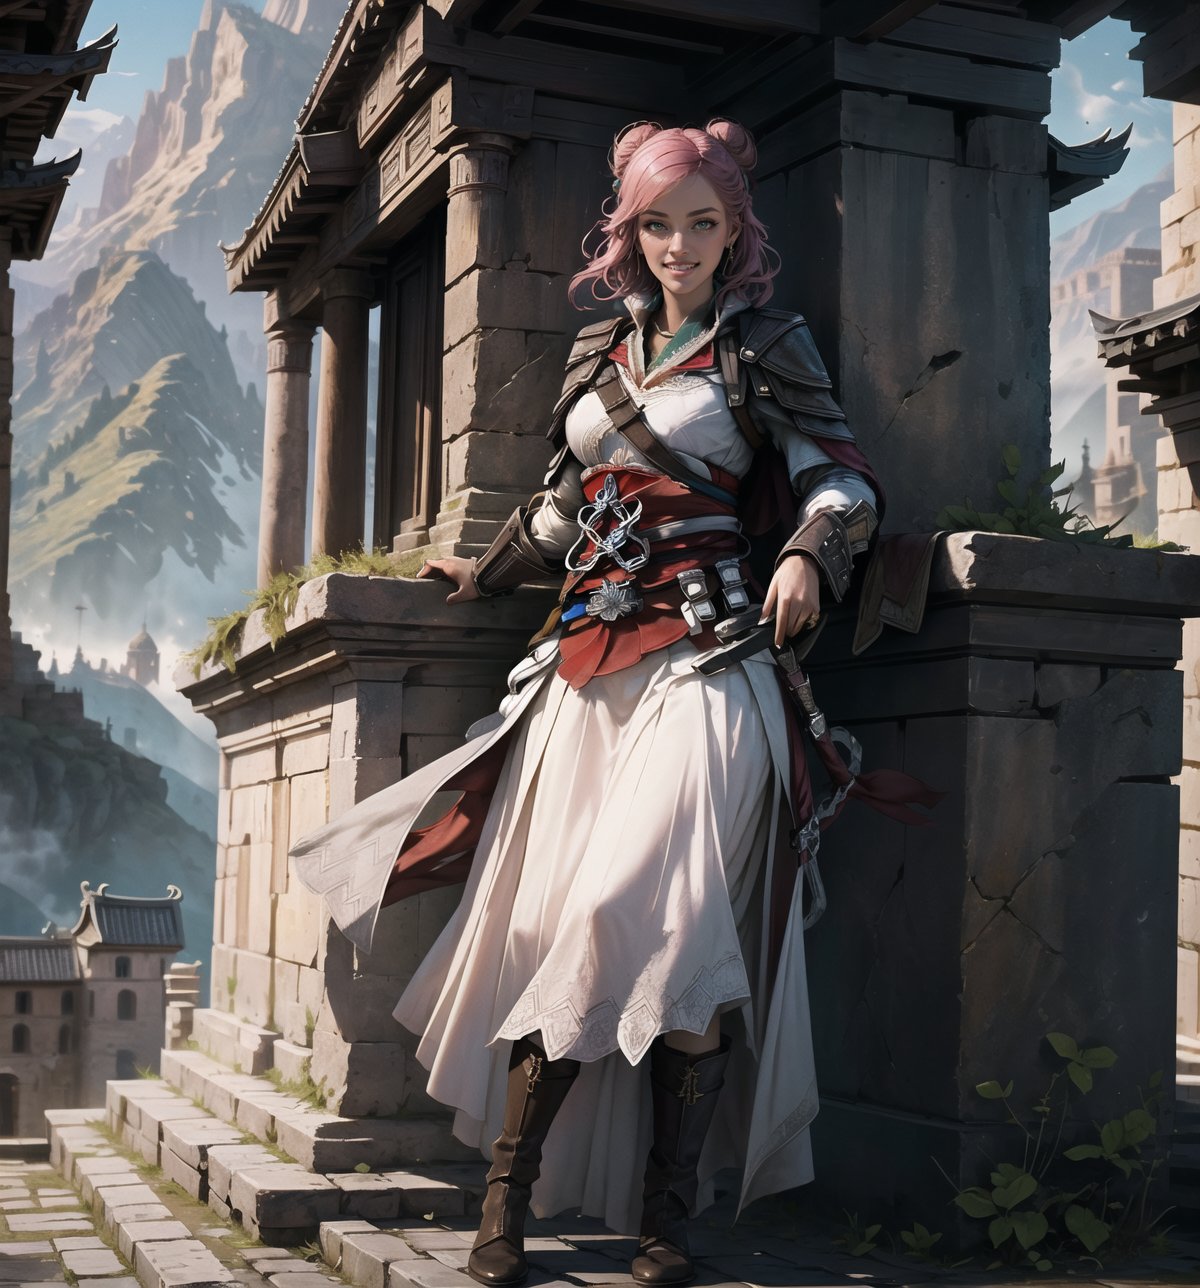 An ultra-detailed 16K masterpiece with Adventure and ((Assassin's Creed)) styles, rendered in ultra-high resolution with realistic details. | Sophia, a 25-year-old woman, dressed in an Assassin's Creed costume. The costume is white and gray, with black and red details, and has several accessories, such as a cape, a sword and a hidden blade. Her pink hair is long and wavy, tied into a high bun. She has green eyes, looking at the viewer, ((smiling and showing her teeth)). It is located in an ancient assassin temple in Rome, with rock structures and an altar in the center. The mountain landscape in the background adds a mysterious and adventurous atmosphere to the place. | The image highlights the powerful and imposing figure of Sophia and the historic and mysterious elements of the temple. The rock structures, the altar, the cloak, the sword and the hidden blade, together with the woman, create a magical and exciting environment. The mountain landscape in the background adds a touch of drama and mystery to the scene. The shadows created by the sunlight highlight the details of the scene and create a tense, energetic atmosphere. | Dramatic and vibrant lighting effects create a magical and immersive atmosphere, while detailed textures on the structures, cape and costume add realism to the image. | A moving, historical scene of a woman in an Assassin's Creed costume in an ancient assassin temple in Rome, exploring themes of adventure, mystery and danger. | (((The image reveals a full-body_shot as Sophia assumes a sensual pose, engagingly leaning against a structure within the scene in an exciting manner. She takes on a sensual pose as she interacts, boldly leaning on a structure, leaning back and boldly throwing herself onto the structure, reclining back in an exhilarating way.))). | (((full-body_shot))), ((perfect pose)), ((perfect fingers, better hands, perfect hands)), ((perfect legs, perfect feet)), ((huge breasts)), ((perfect design)), ((perfect composition)), ((very detailed scene, very detailed background, perfect layout, correct imperfections)), More Detail, Enhance